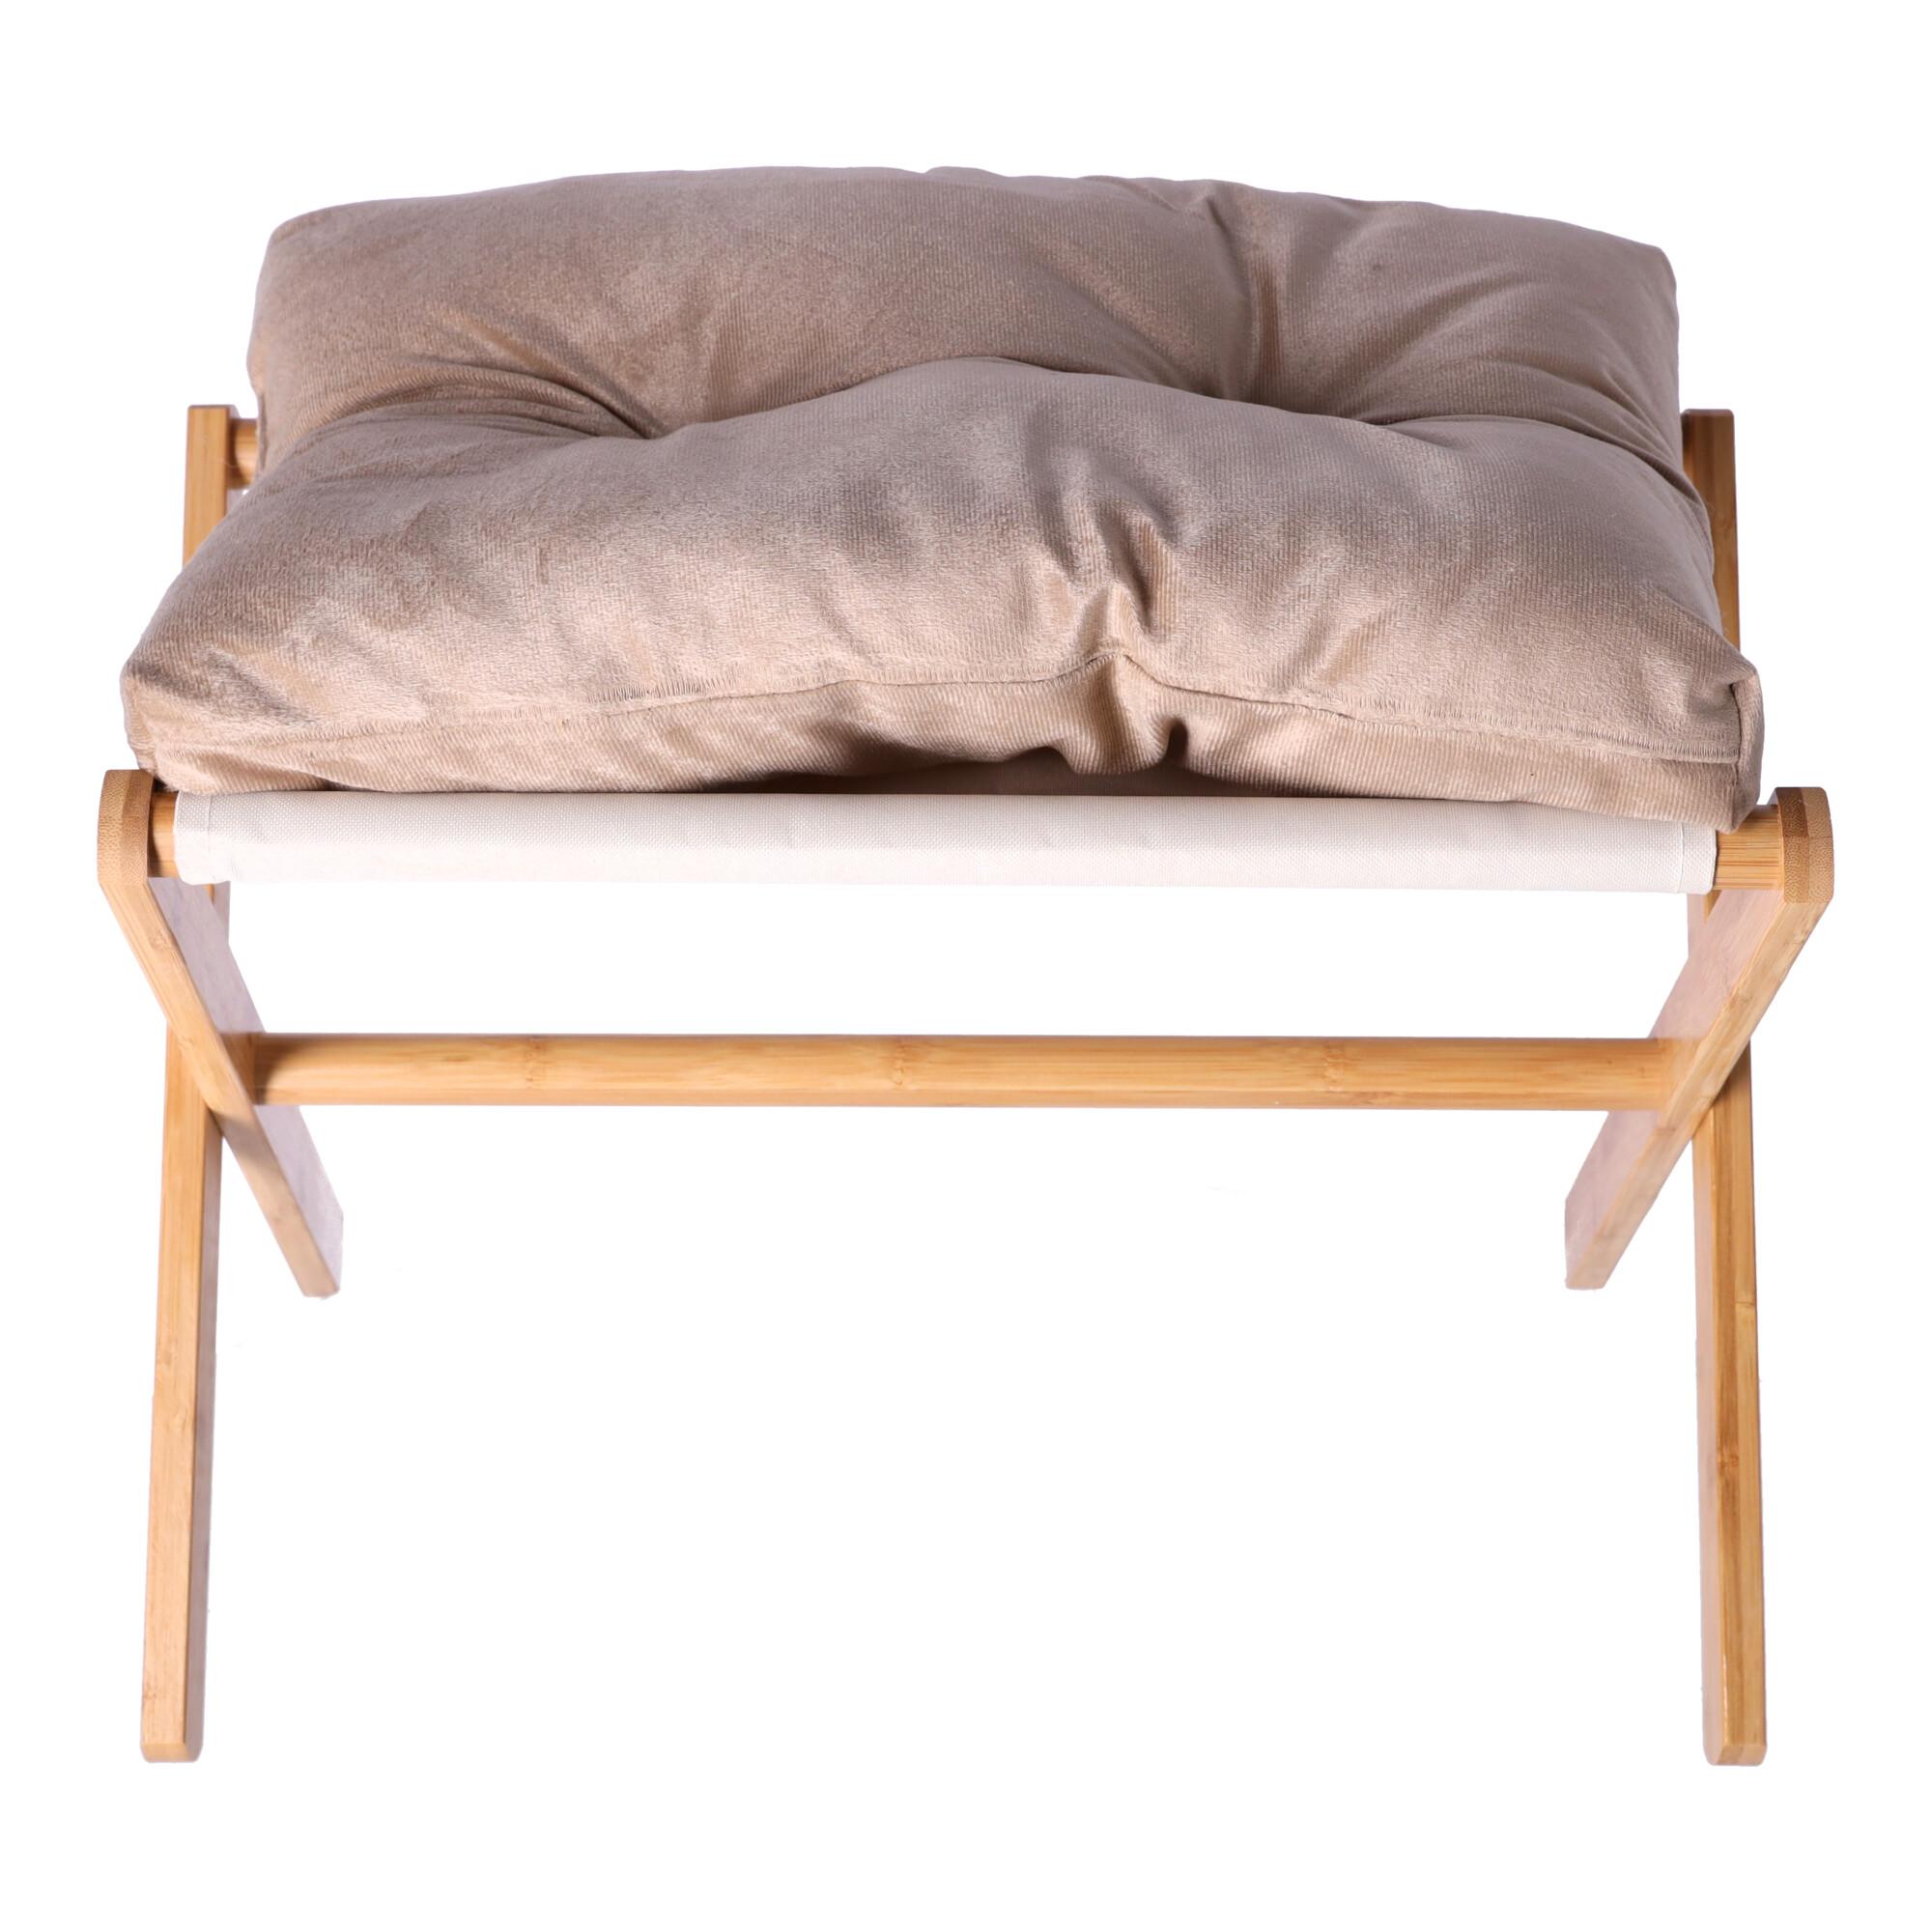 Bench, pouffe with a seat - light brown, large